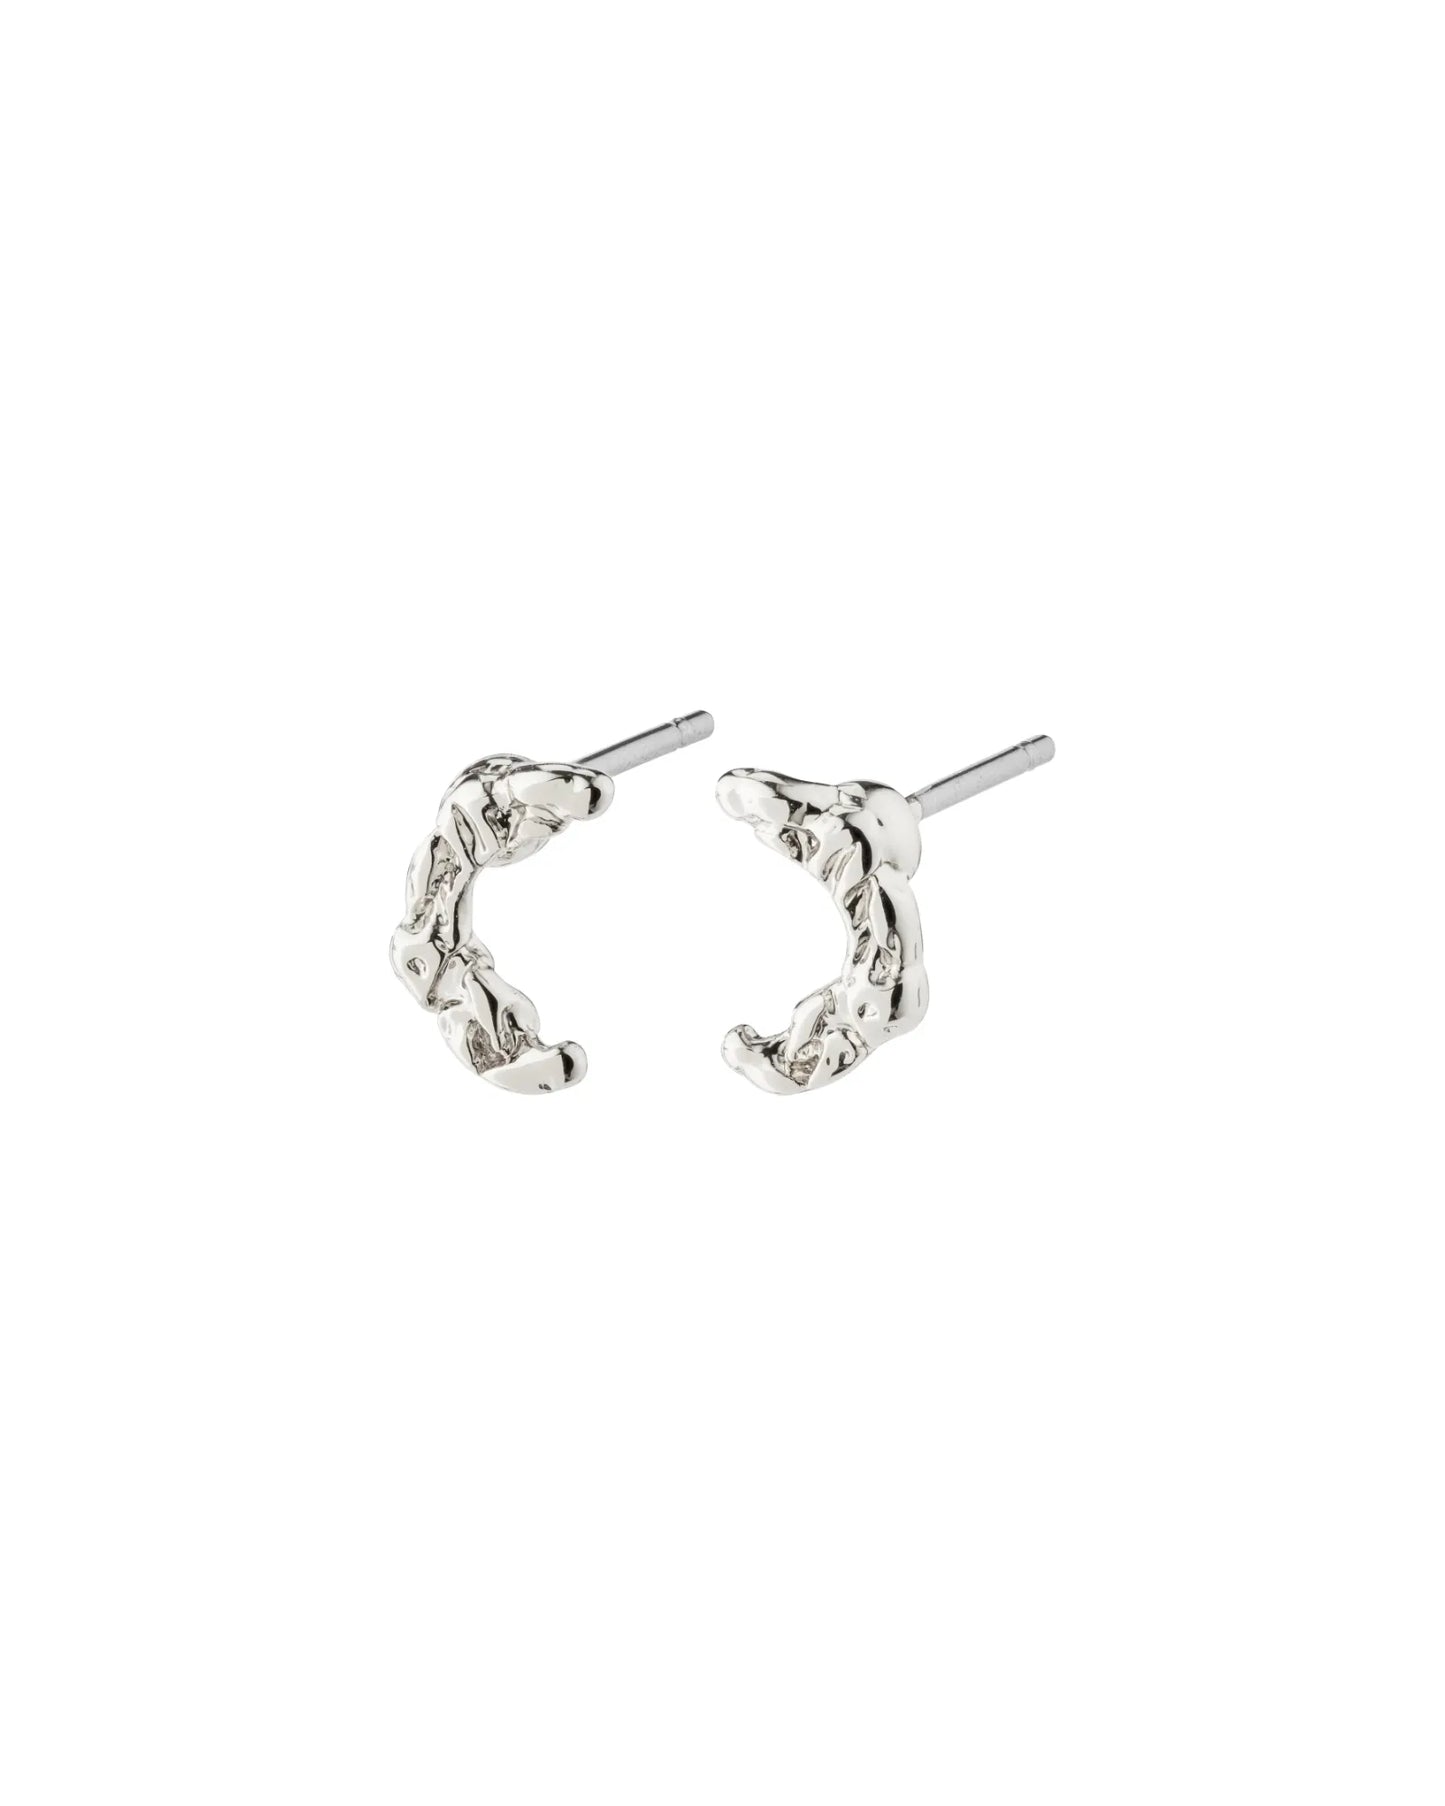 REMY Recycled Earrings - Silver Plated